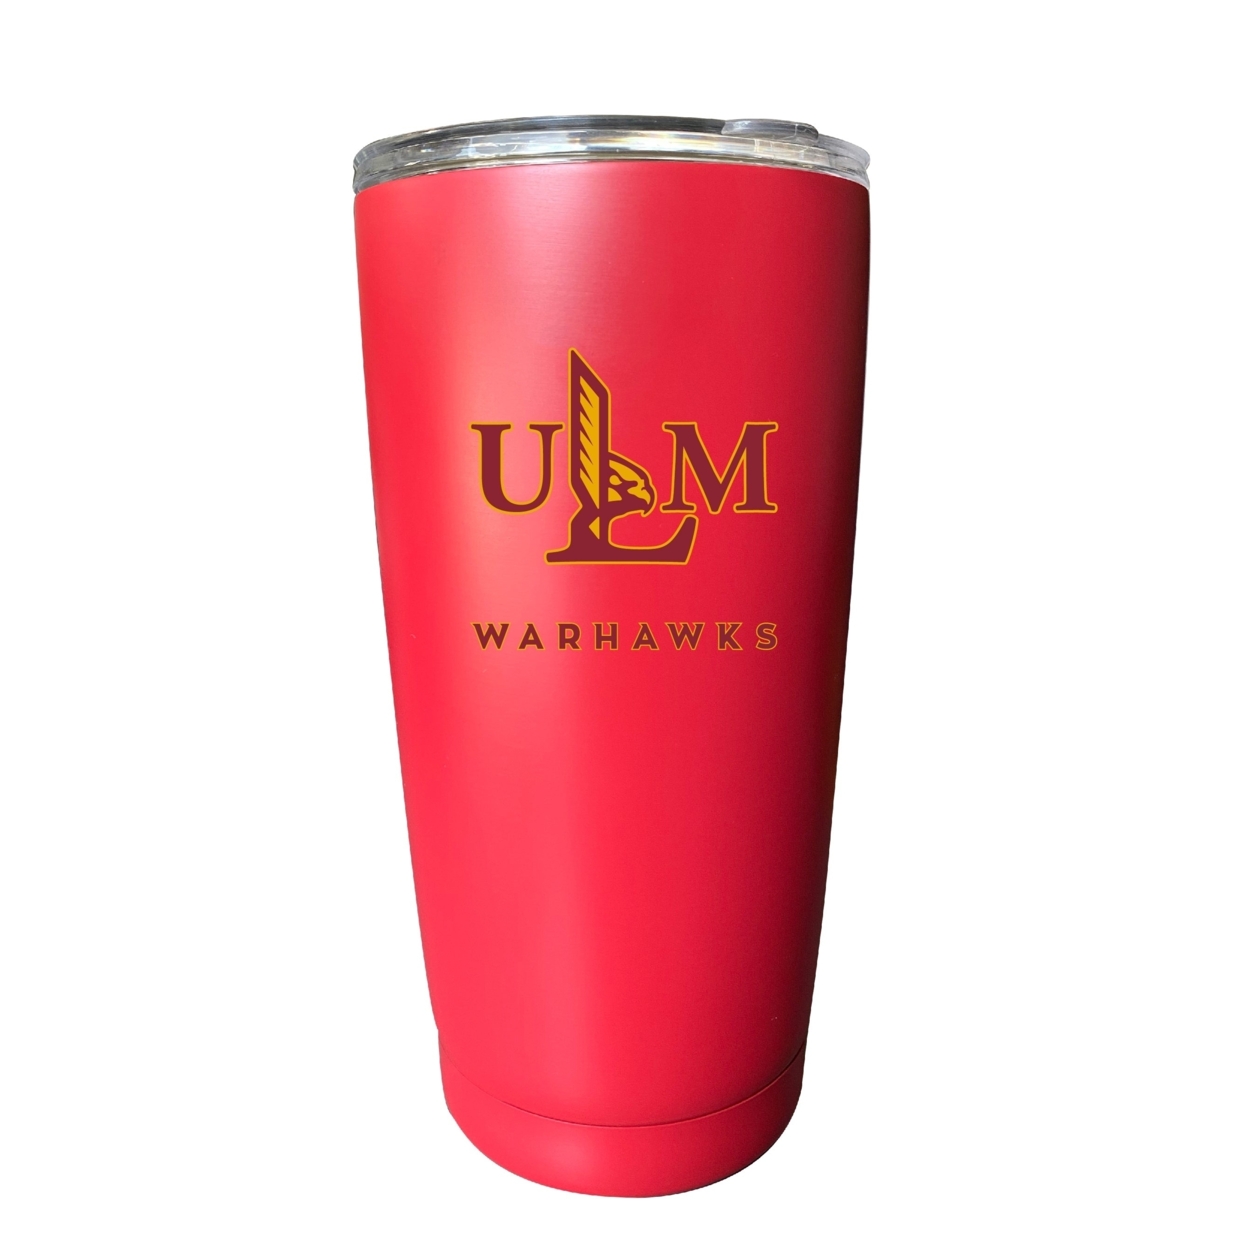 University Of Louisiana Monroe 16 Oz Insulated Stainless Steel Tumbler - Choose Your Color. - Seafoam